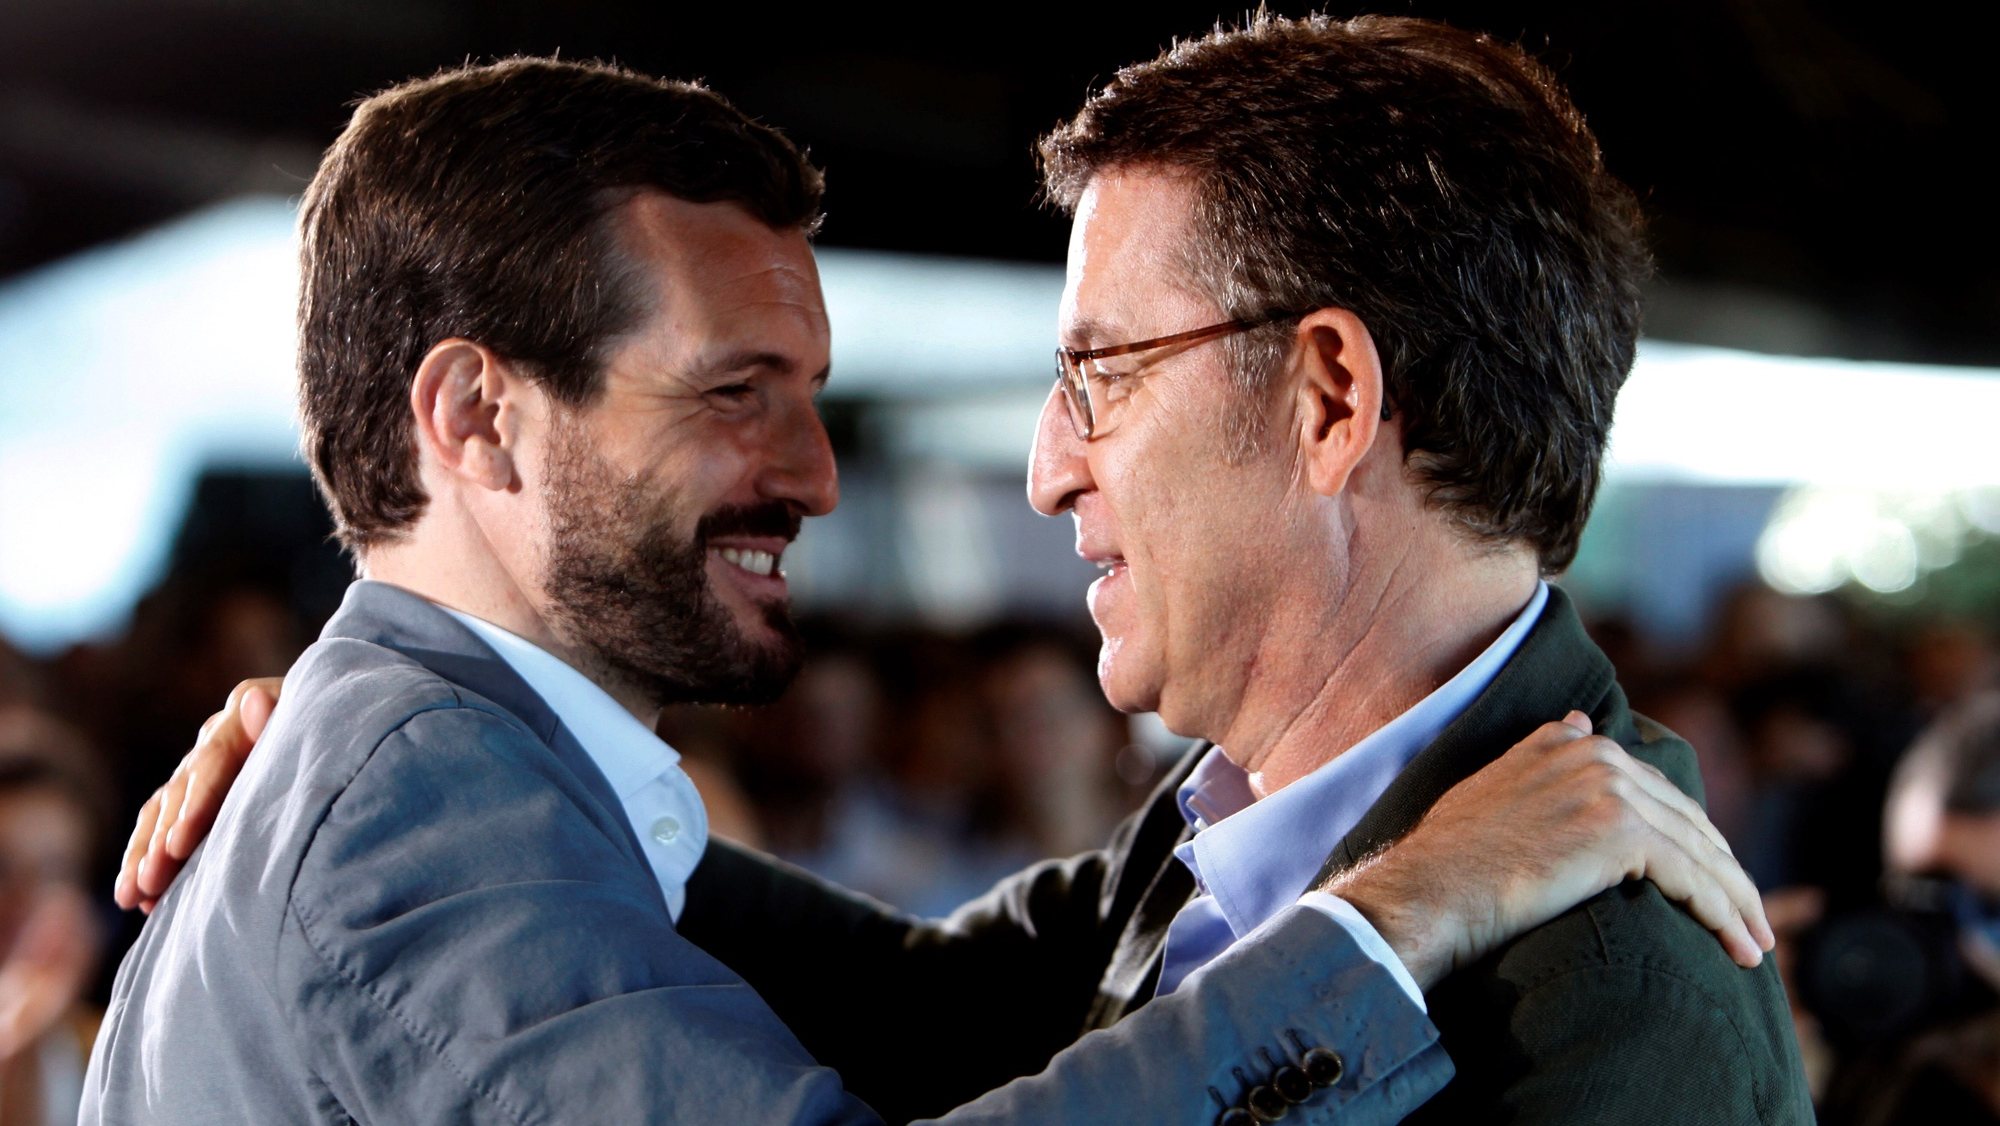 epa07900965 Spanish right People&#039;s Party leader, Pablo Casado (L), greets Galicia regional President, Alberto Nunez Feijoo, during an pre-campaign event with supporters in the town of Santa Cruz de Oleiros, Galicia, northwestern Spain, 06 October 2019. Spanish general election will be held on 10 November.  EPA/Cabalar